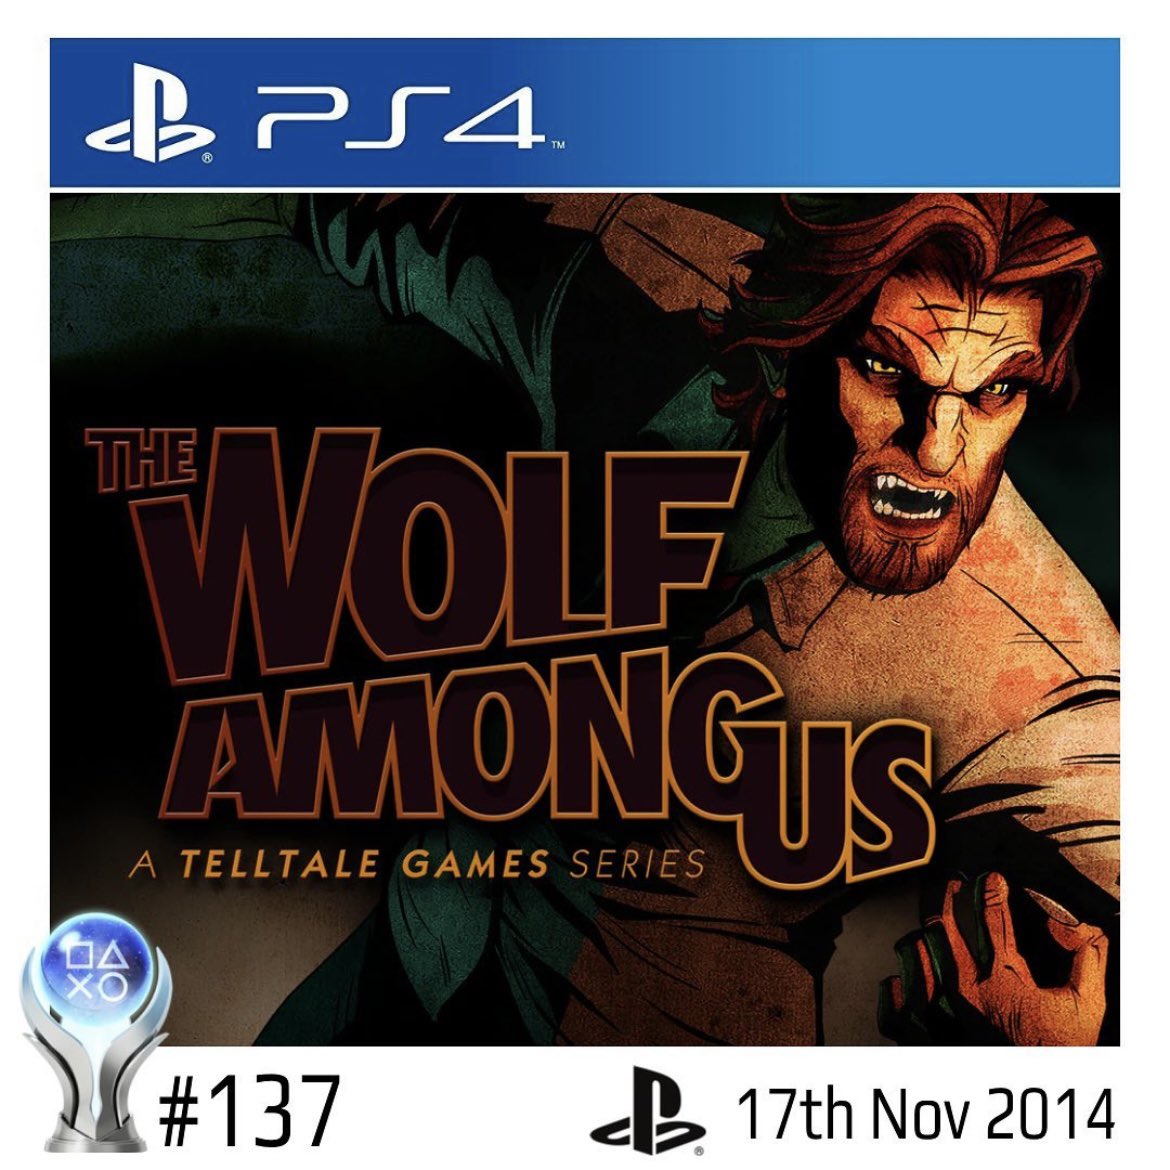 🏆HOWDY’S PLATINUM HISTORY🏆

Platinum 137: The Wolf Among Us

Date Earned: 17th November 2014

More Info: An all time favourite game based on an all time favourite comic series!

#Fables #TheWolfAmongUs #Telltale #TrophyHunter #TrophyHunting #PlatinumTrophy #PS4 #PS4Share #TWAU